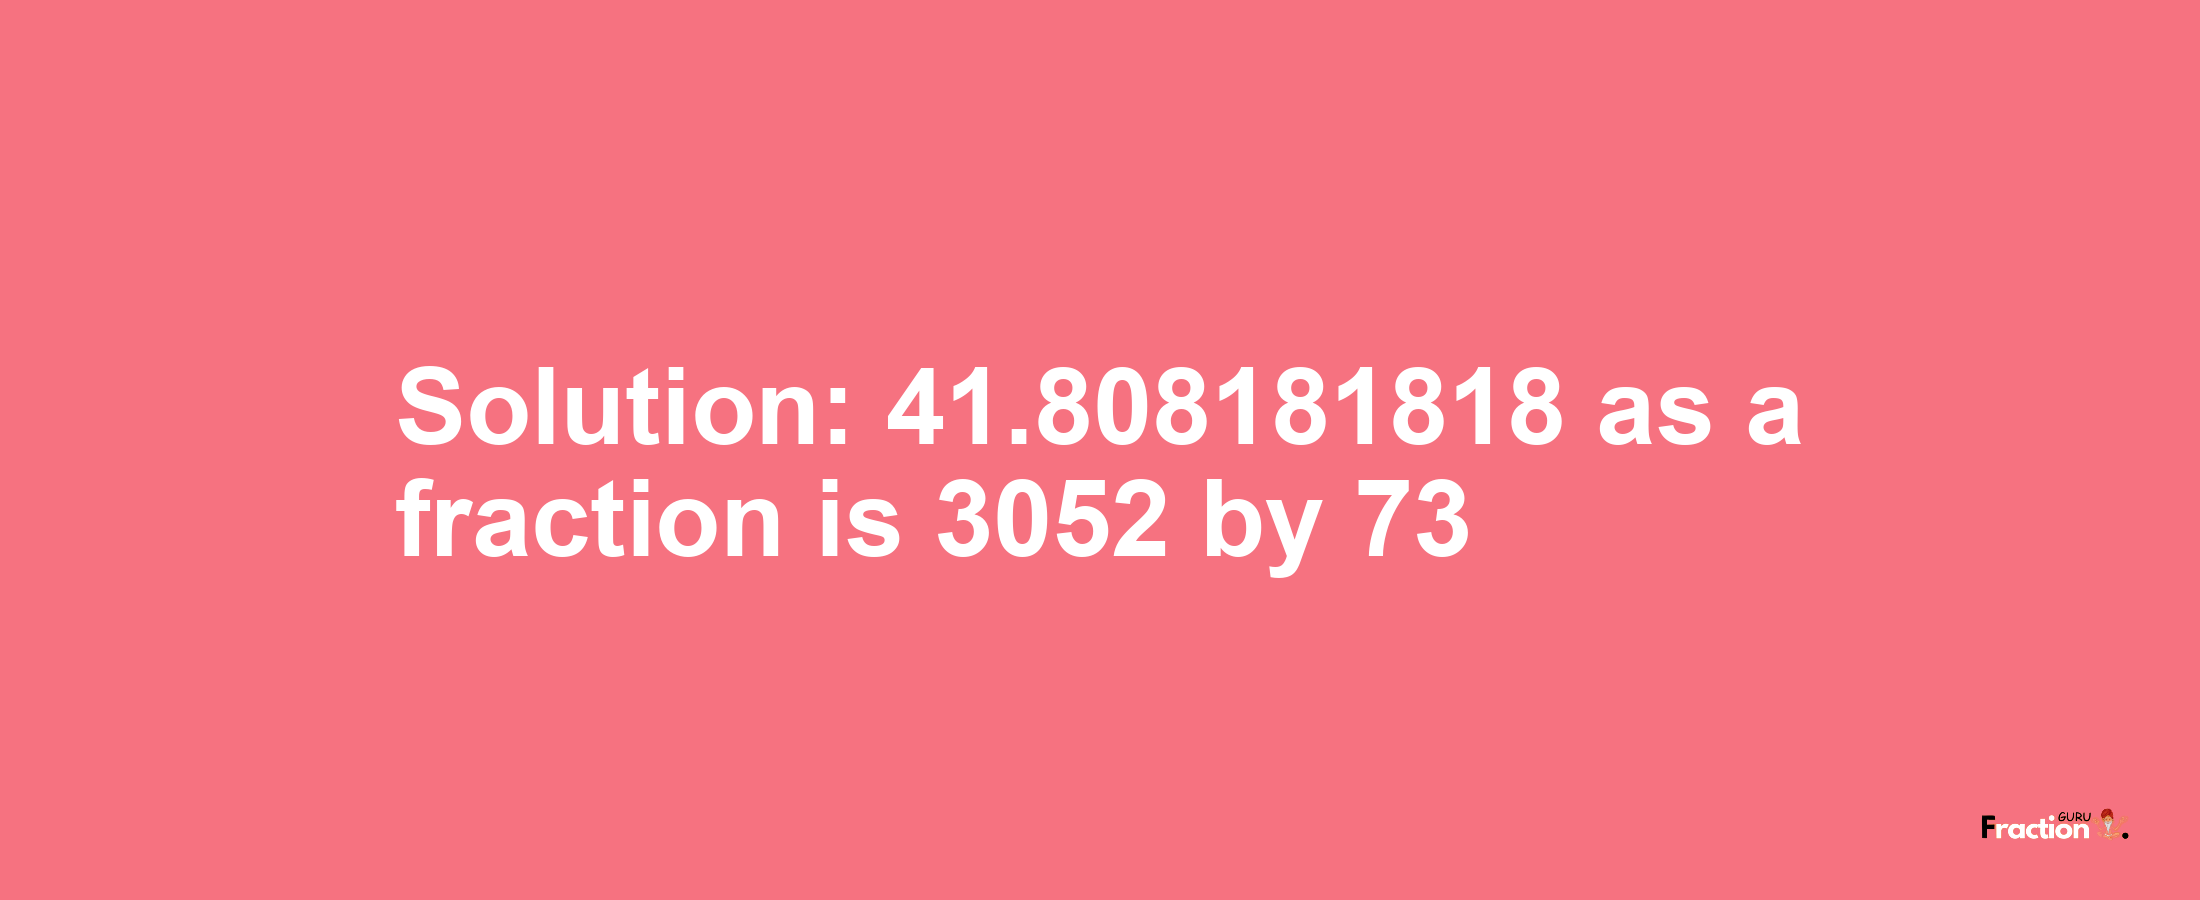 Solution:41.808181818 as a fraction is 3052/73